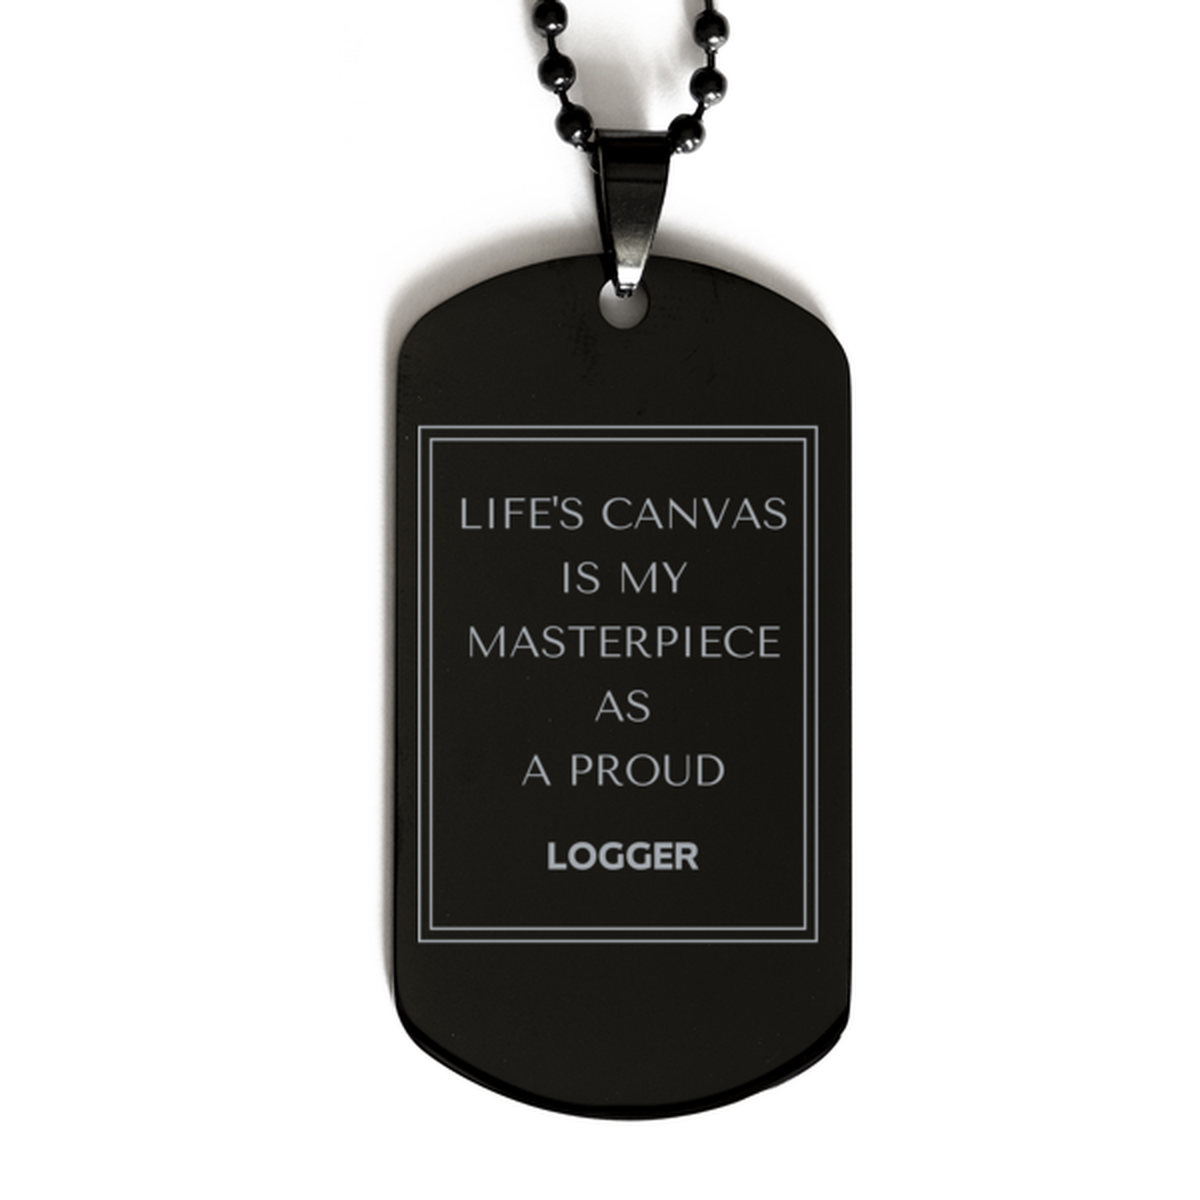 Proud Logger Gifts, Life's canvas is my masterpiece, Epic Birthday Christmas Unique Black Dog Tag For Logger, Coworkers, Men, Women, Friends